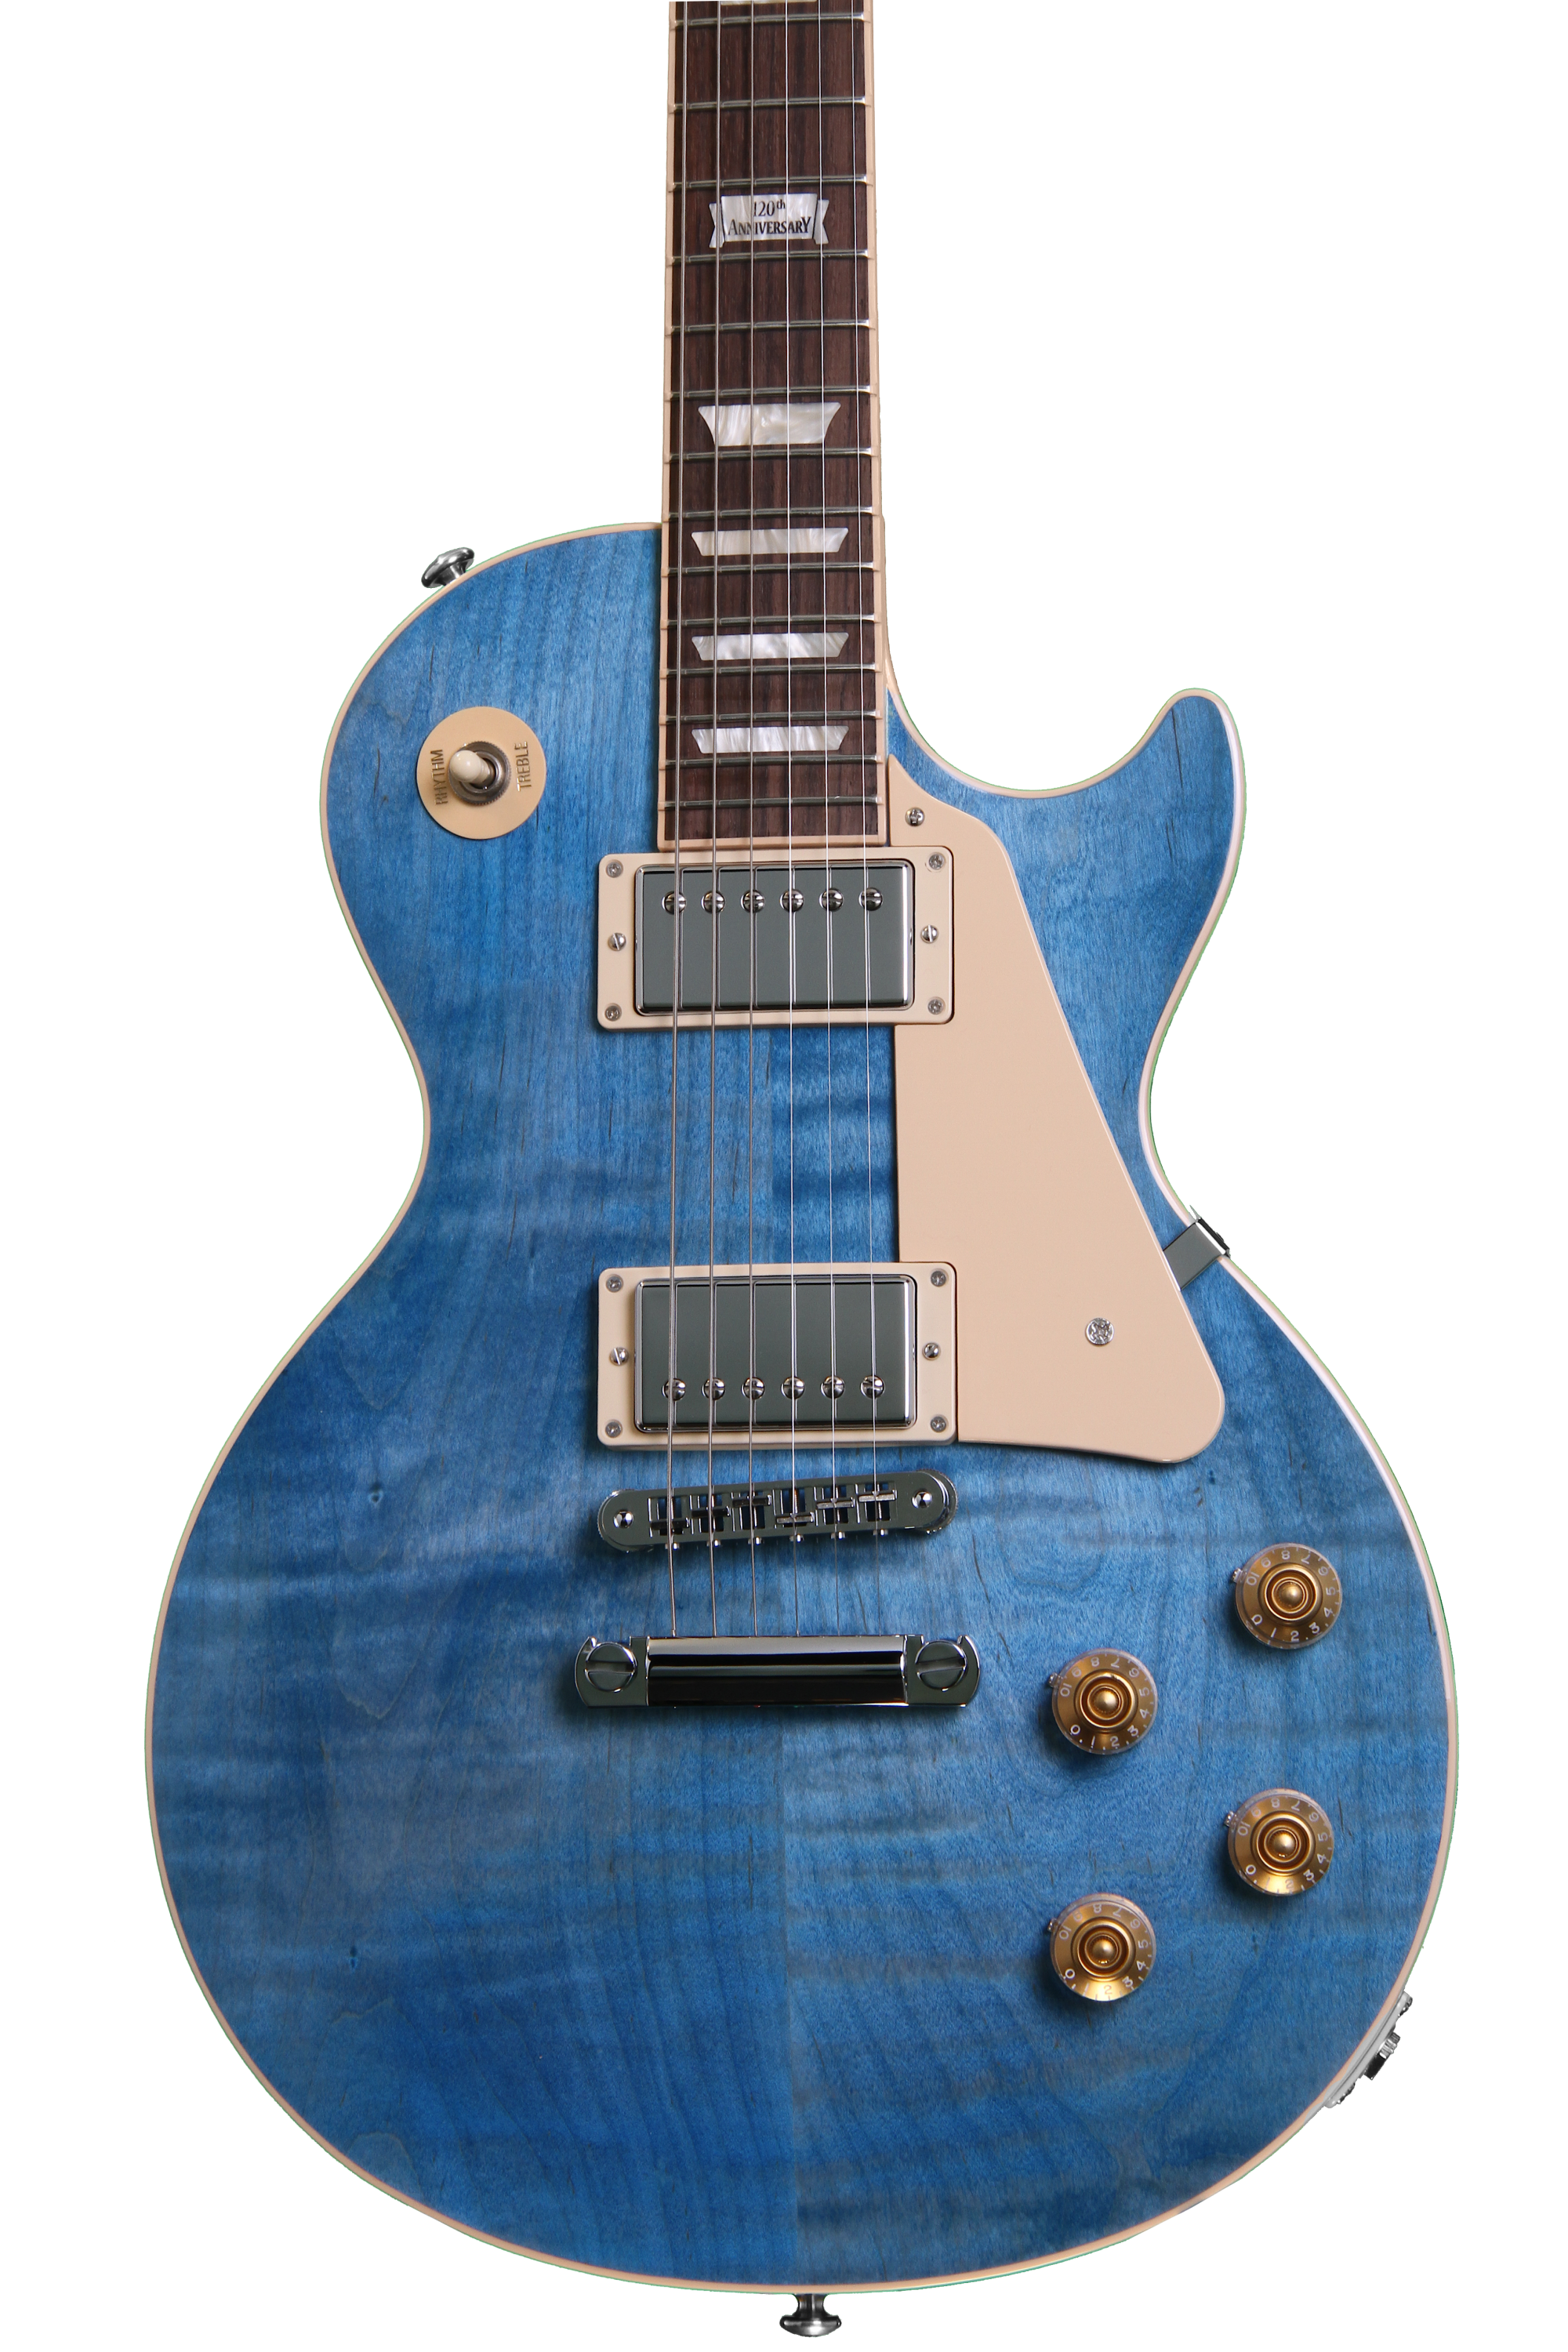 Gibson Les Paul Traditional - Ocean Blue | Sweetwater